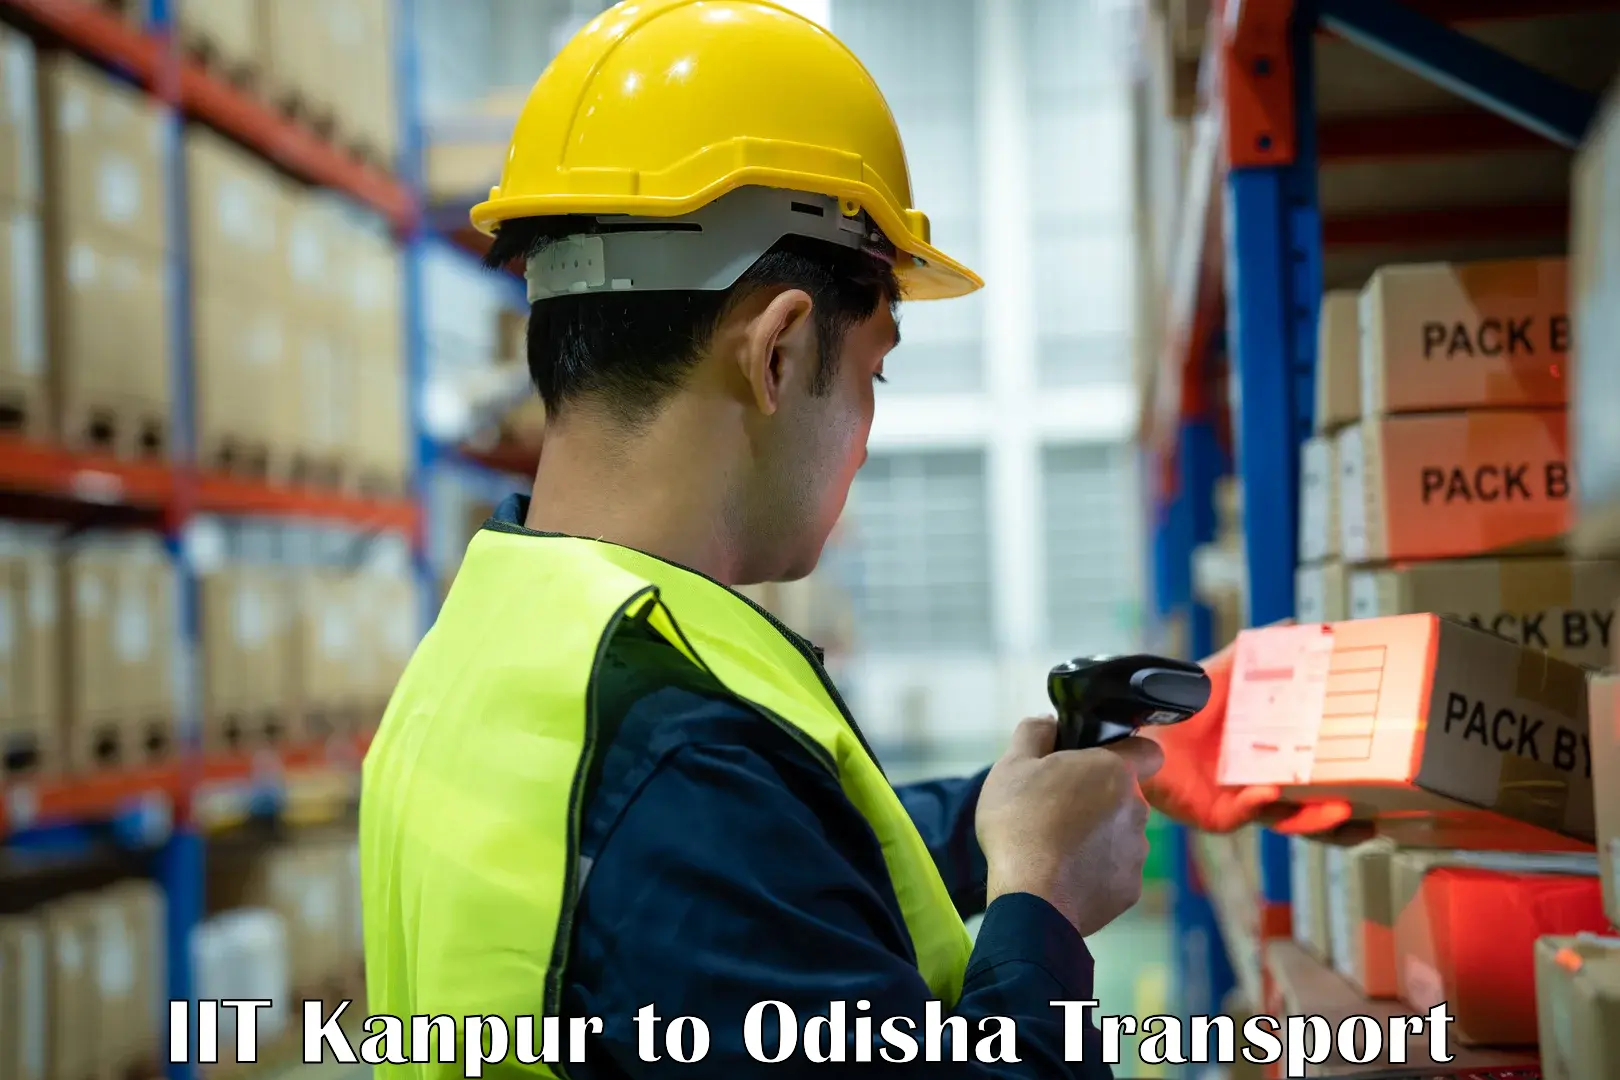 Road transport online services IIT Kanpur to Karanjia